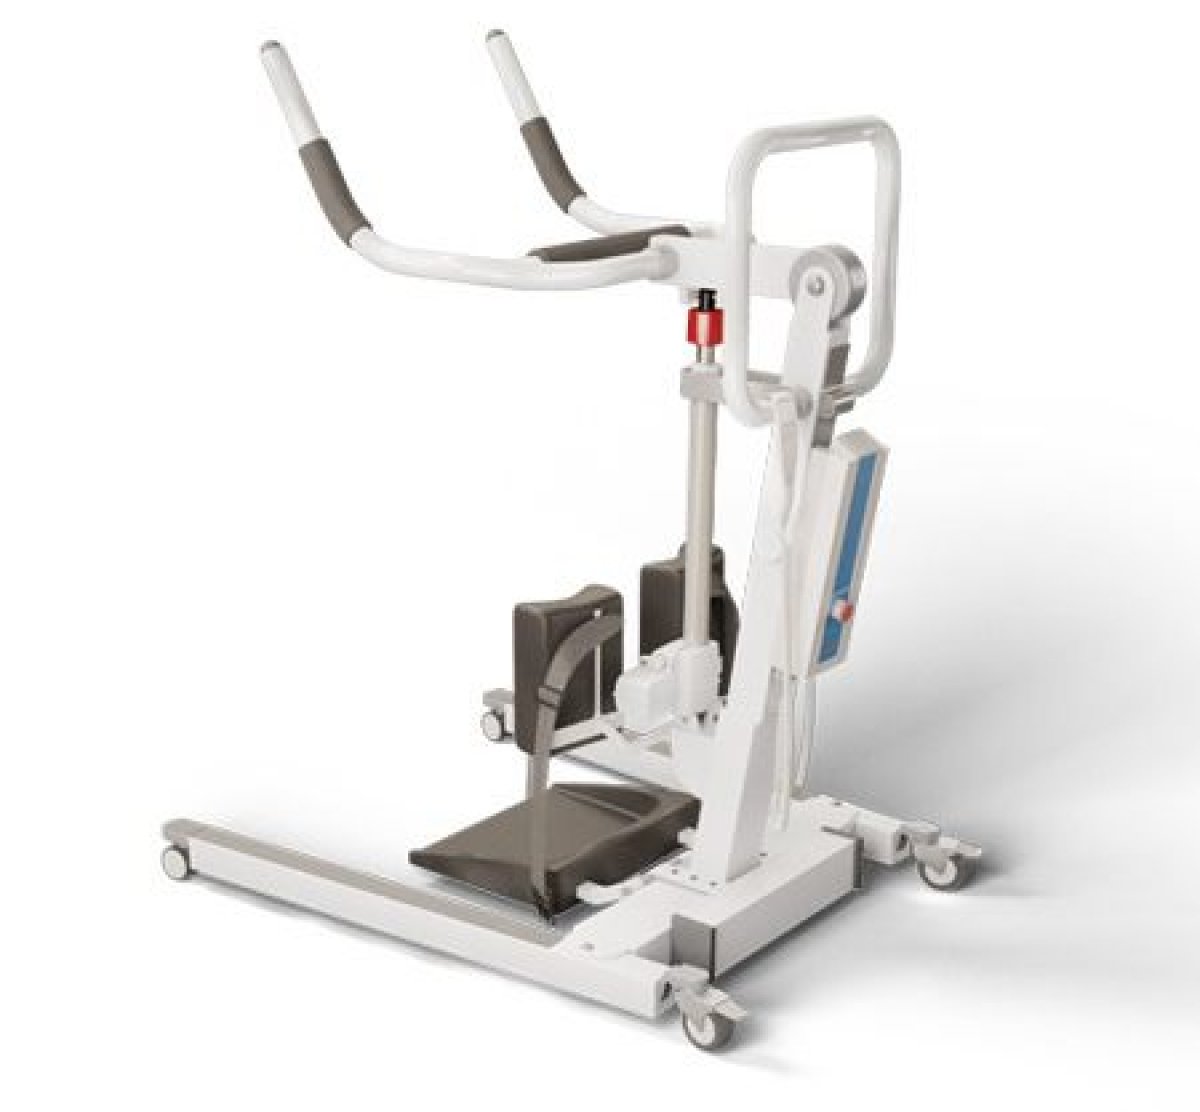 Support rehabilitation efforts with reliable sit-to-stand lifts